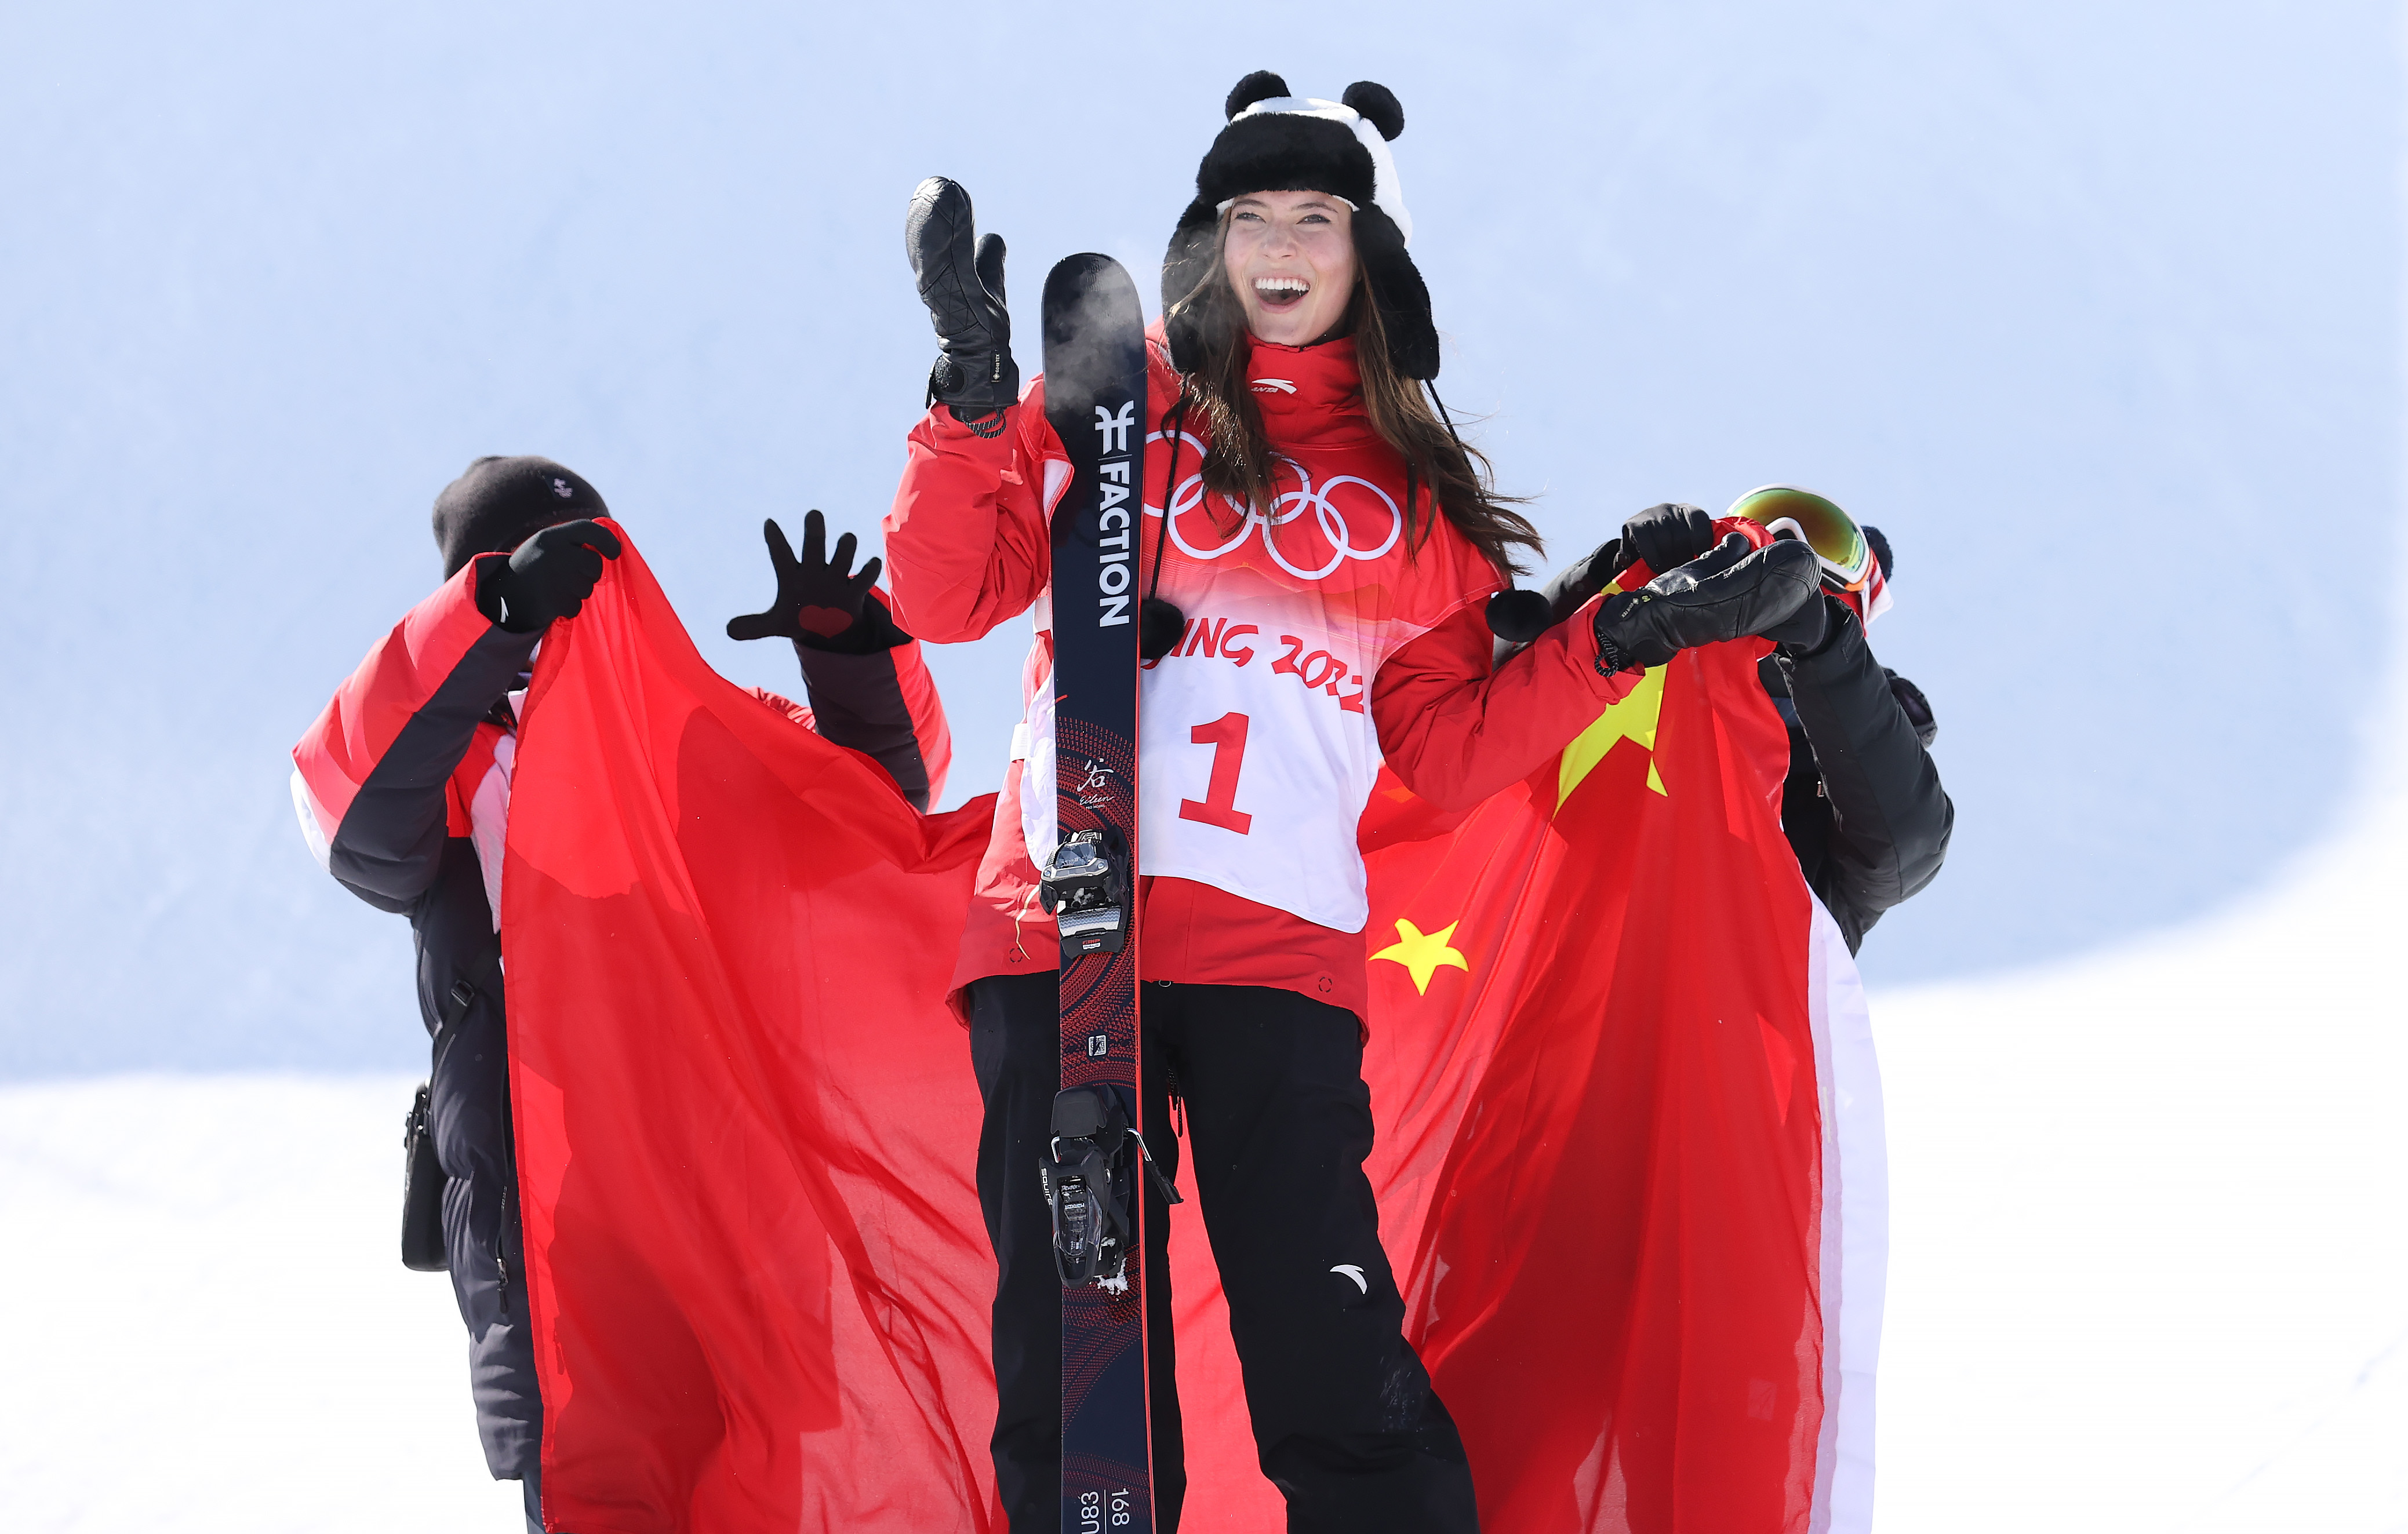 Star skier Eileen Gu switched from Team USA to Team China for 2022